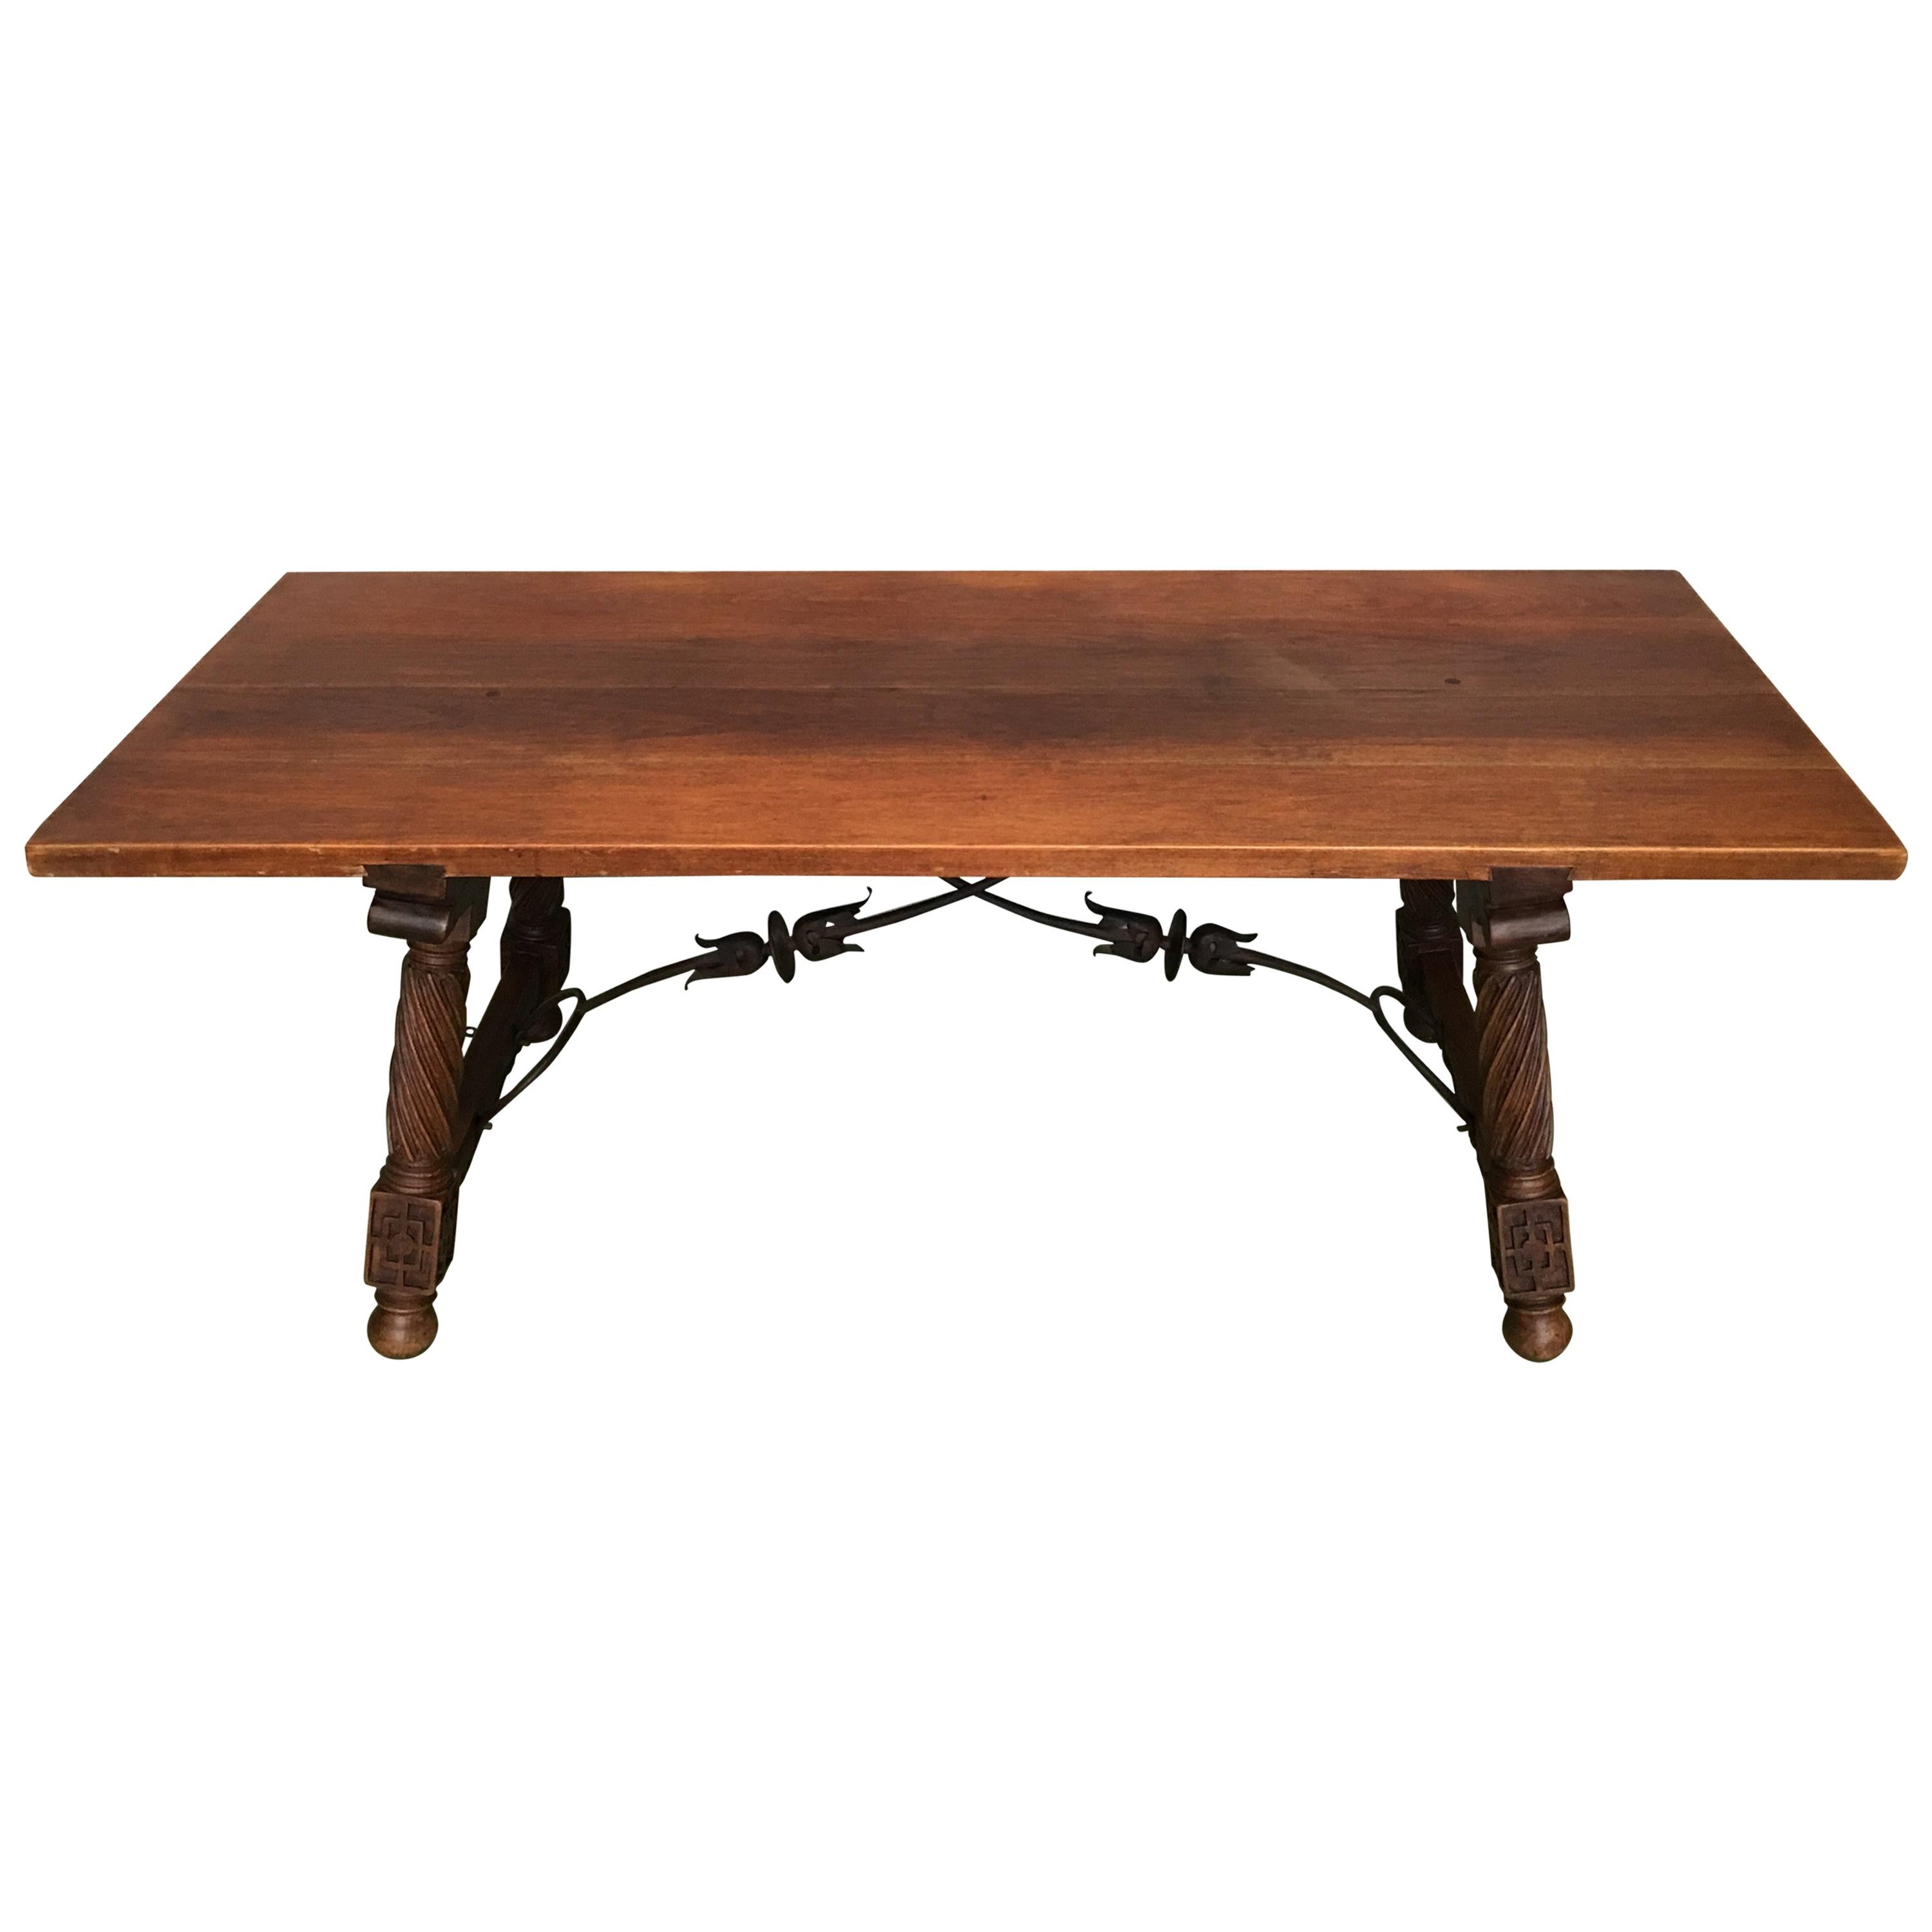 18th Spanish Refectory Desk Table with Solomonic Legs and Iron Stretcher